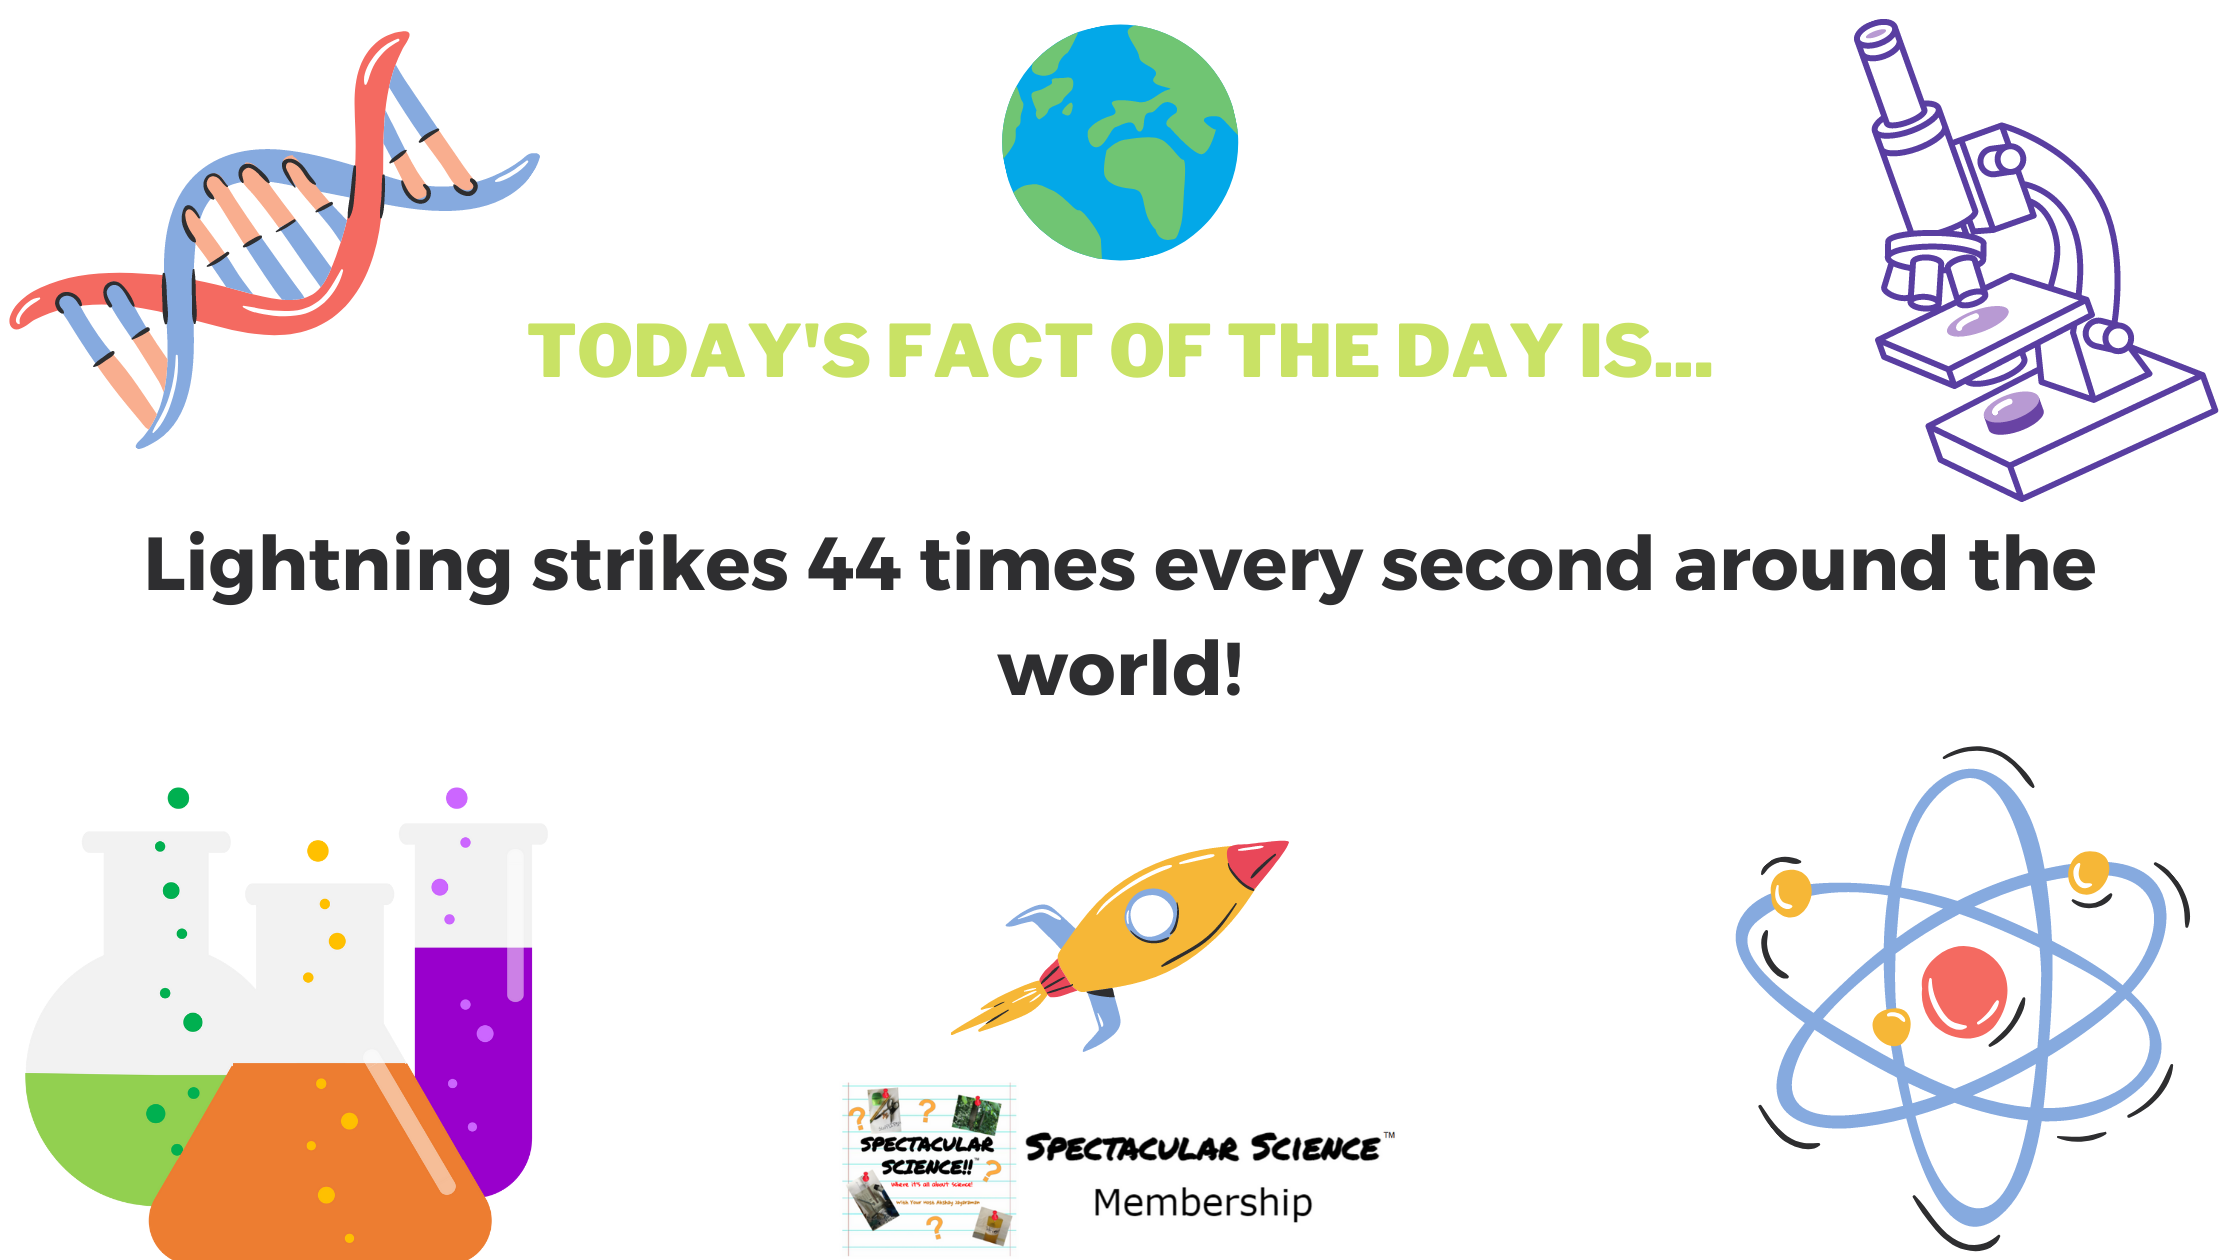 Fact of the Day Image Apr. 15th